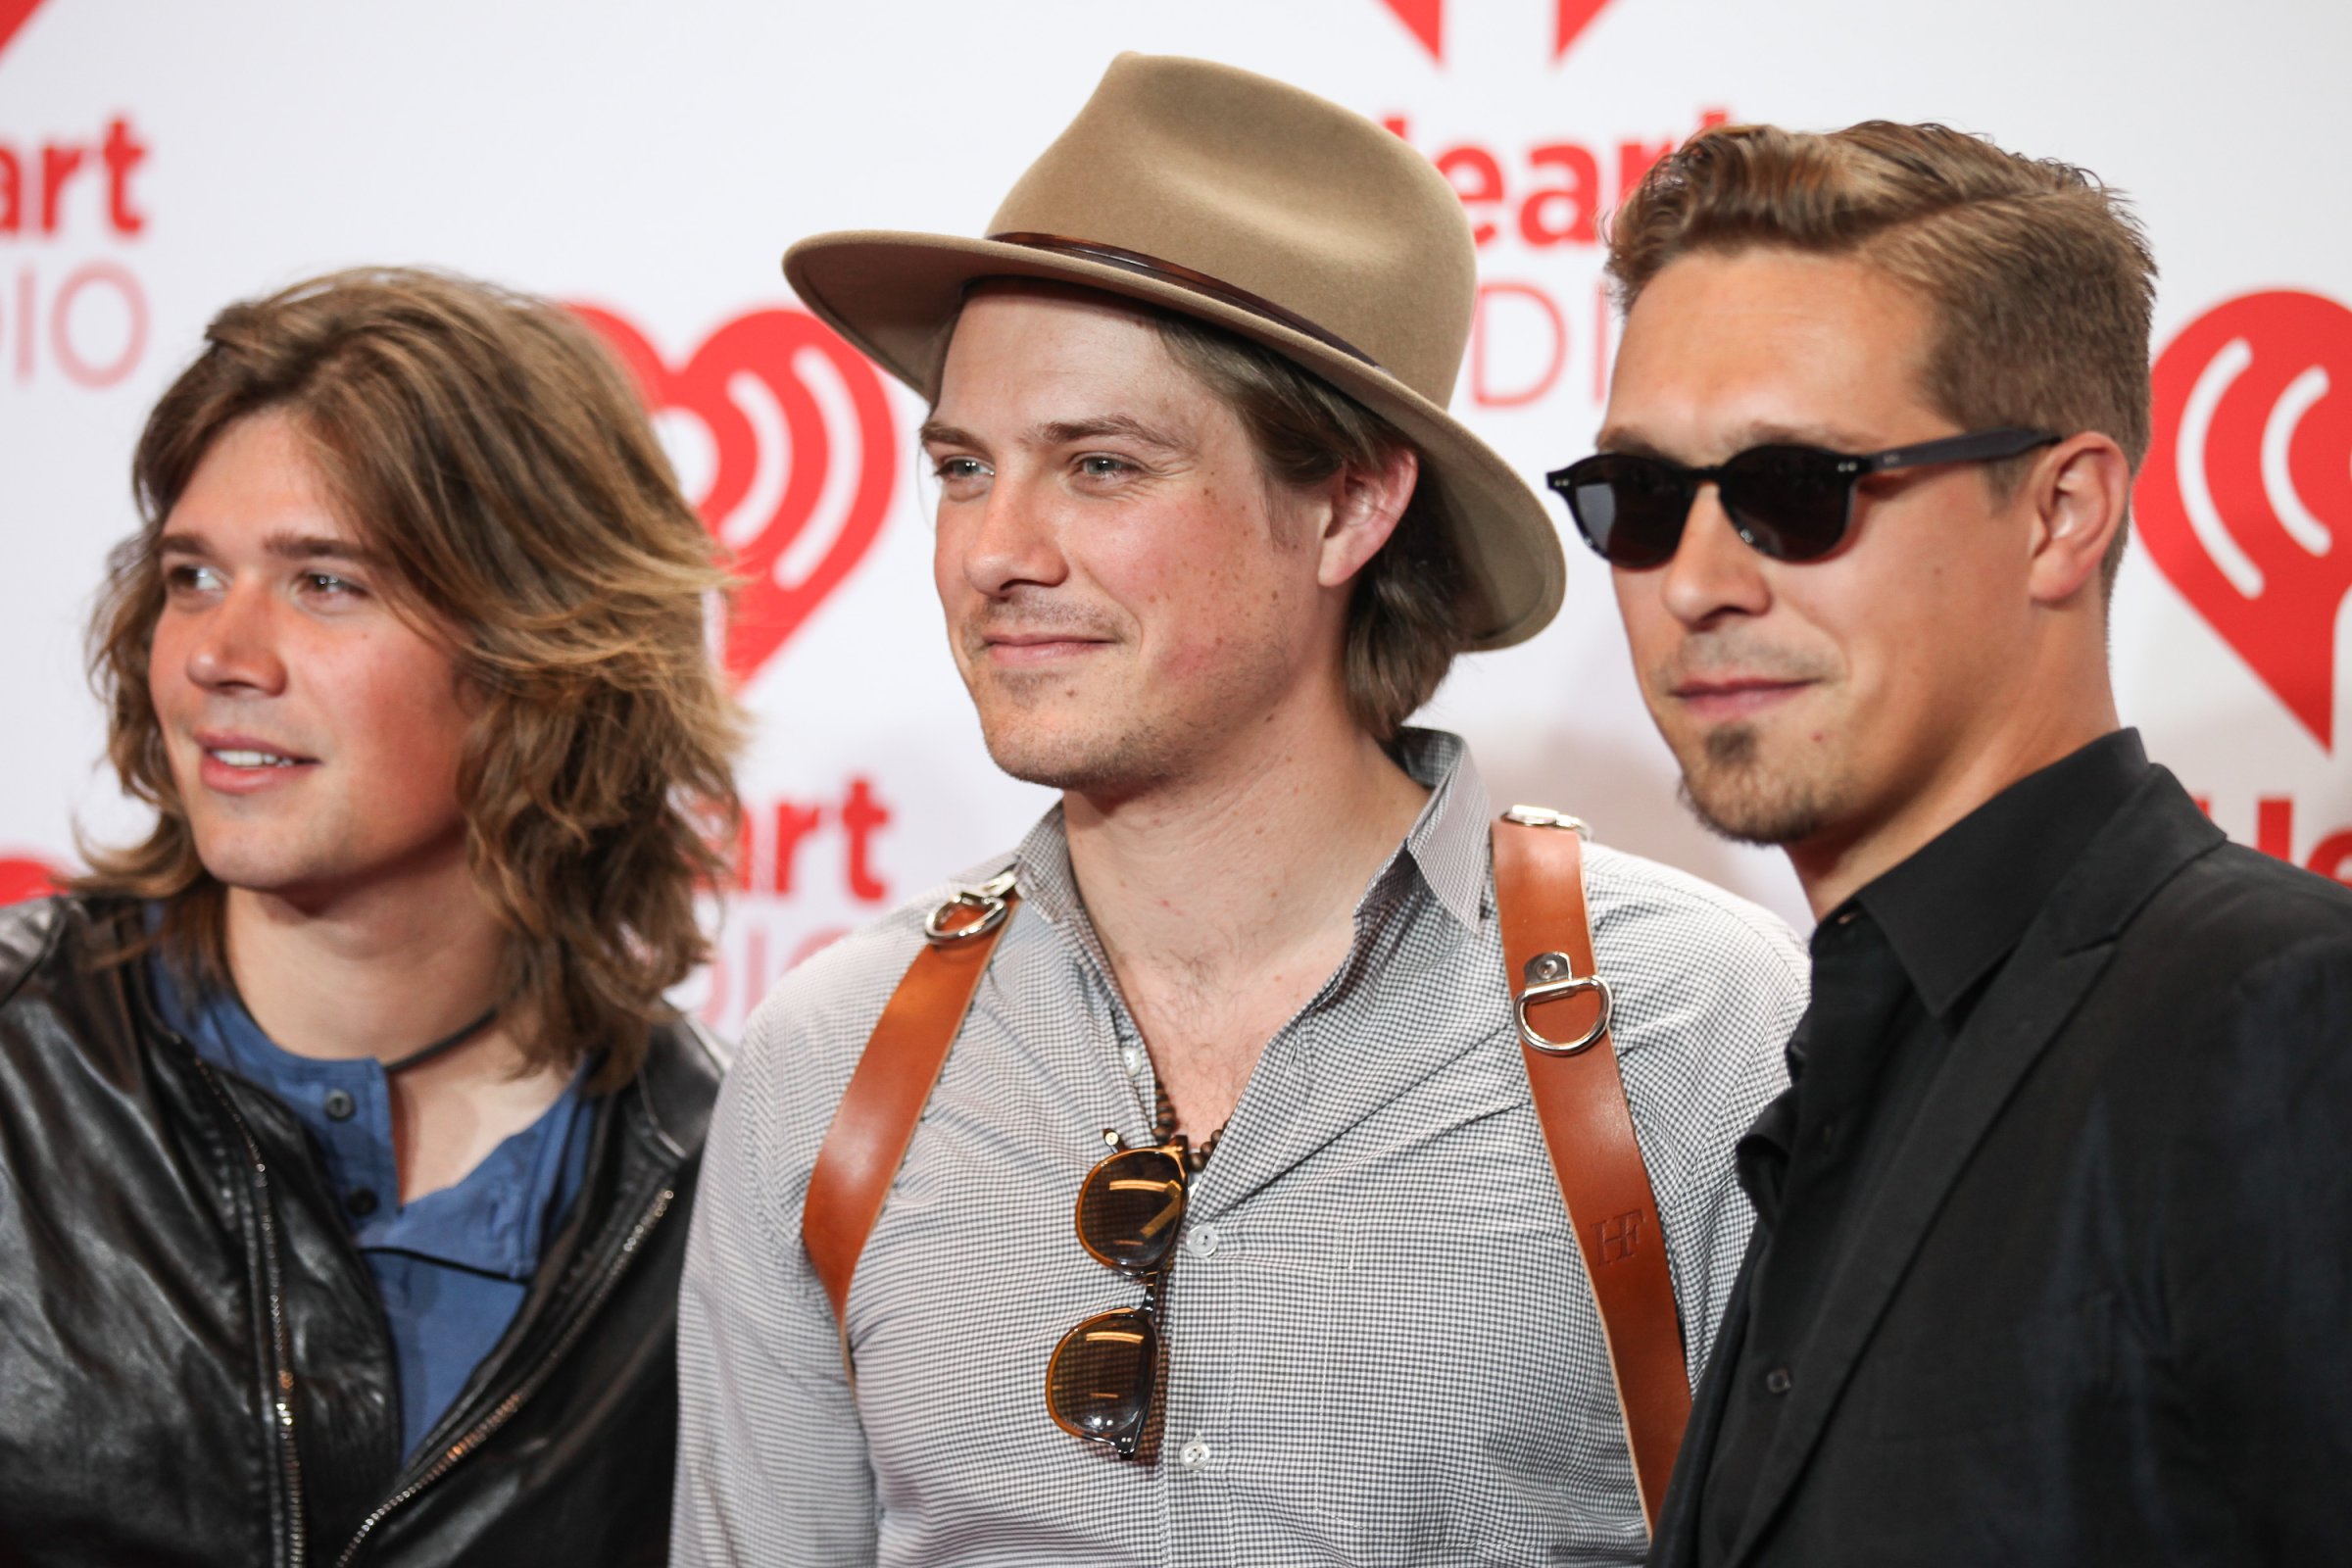 Zac Hanson, Taylor Hanson and Isaac Hanson of Hanson pose in the iHeartRadio music festival photo room on September 21, 2013 in Las Vegas, Nevada.